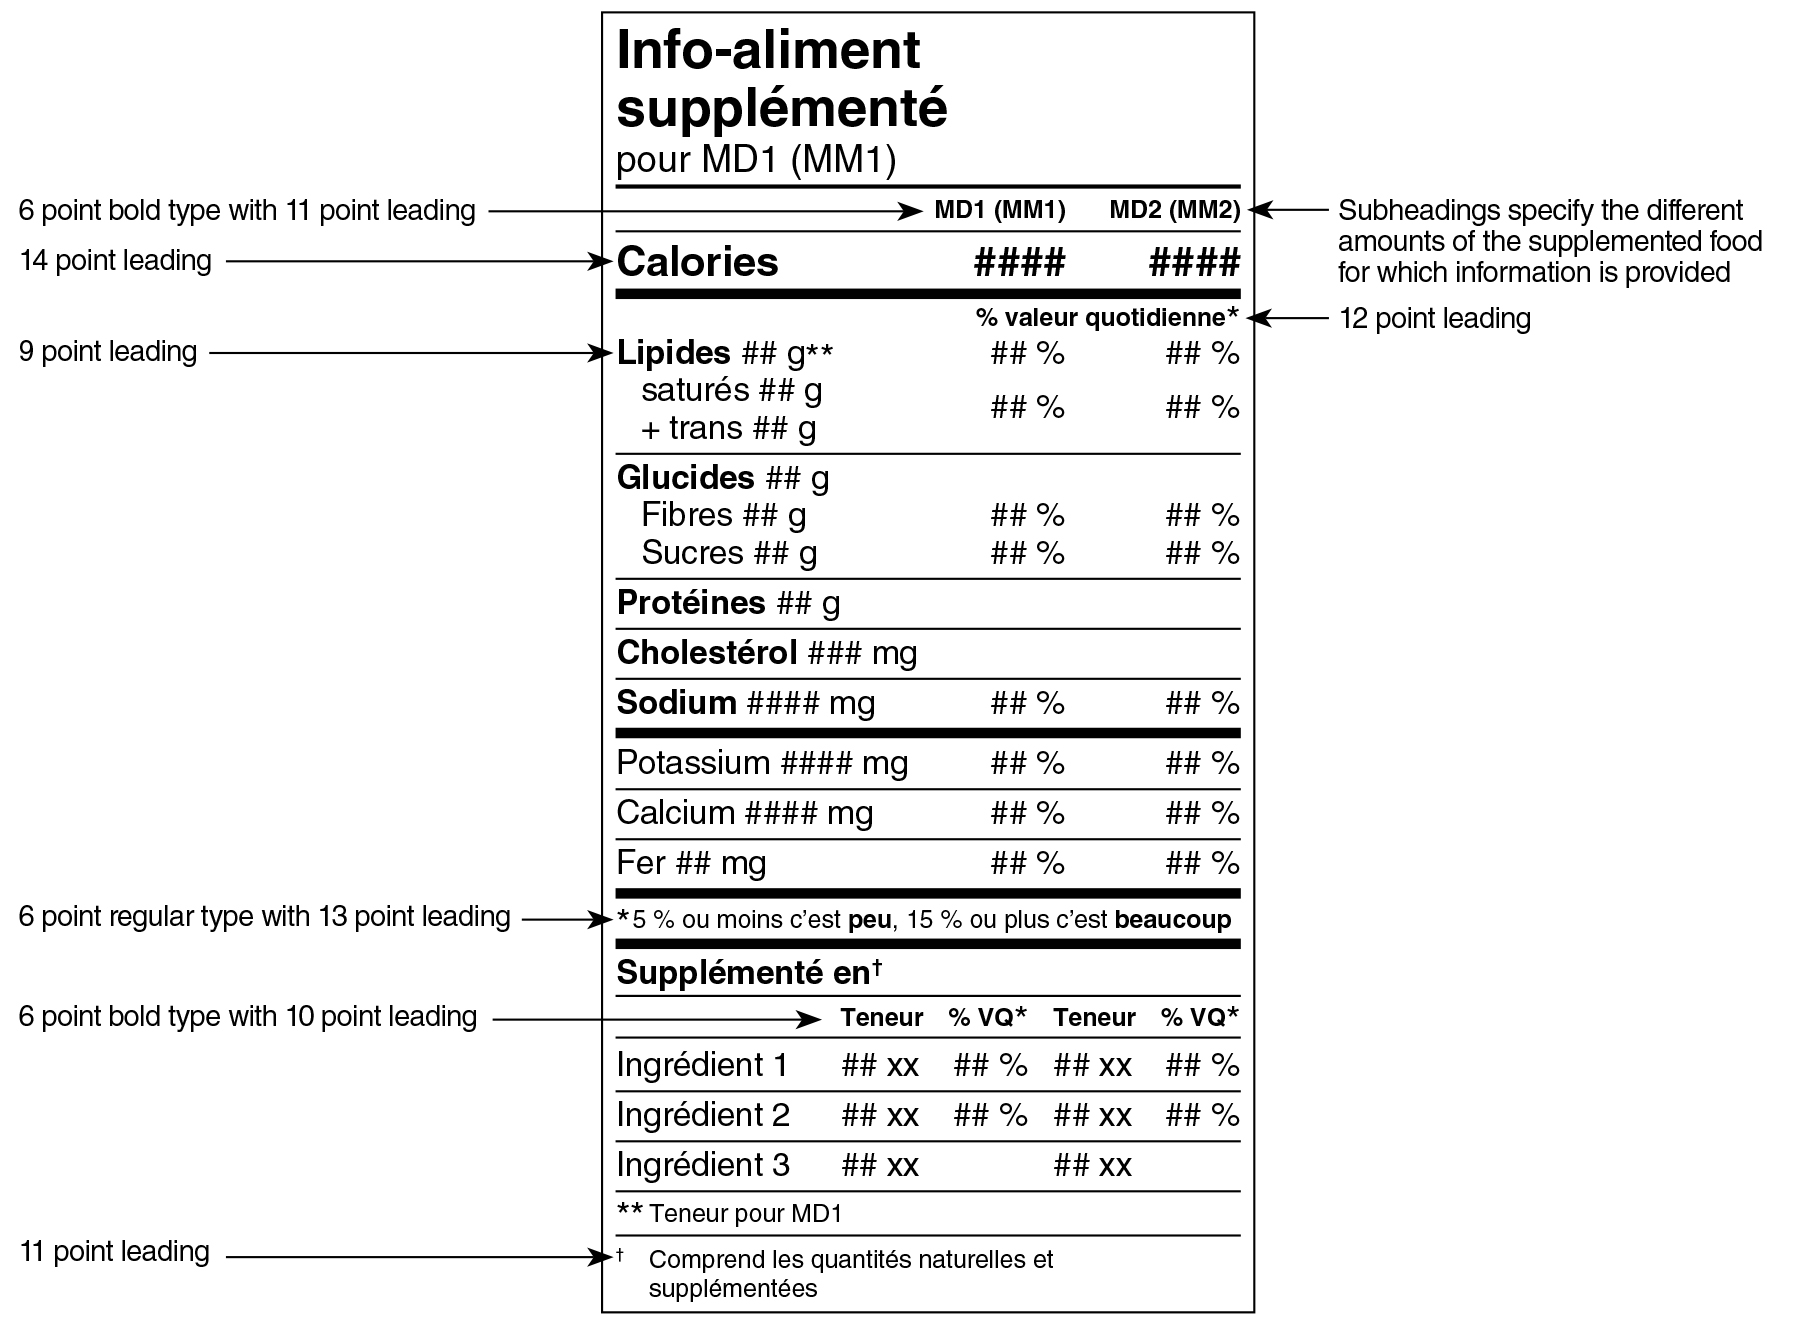 A French Supplemented Food Facts table in dual format for two serving sizes surrounded by specifications. Text version below.